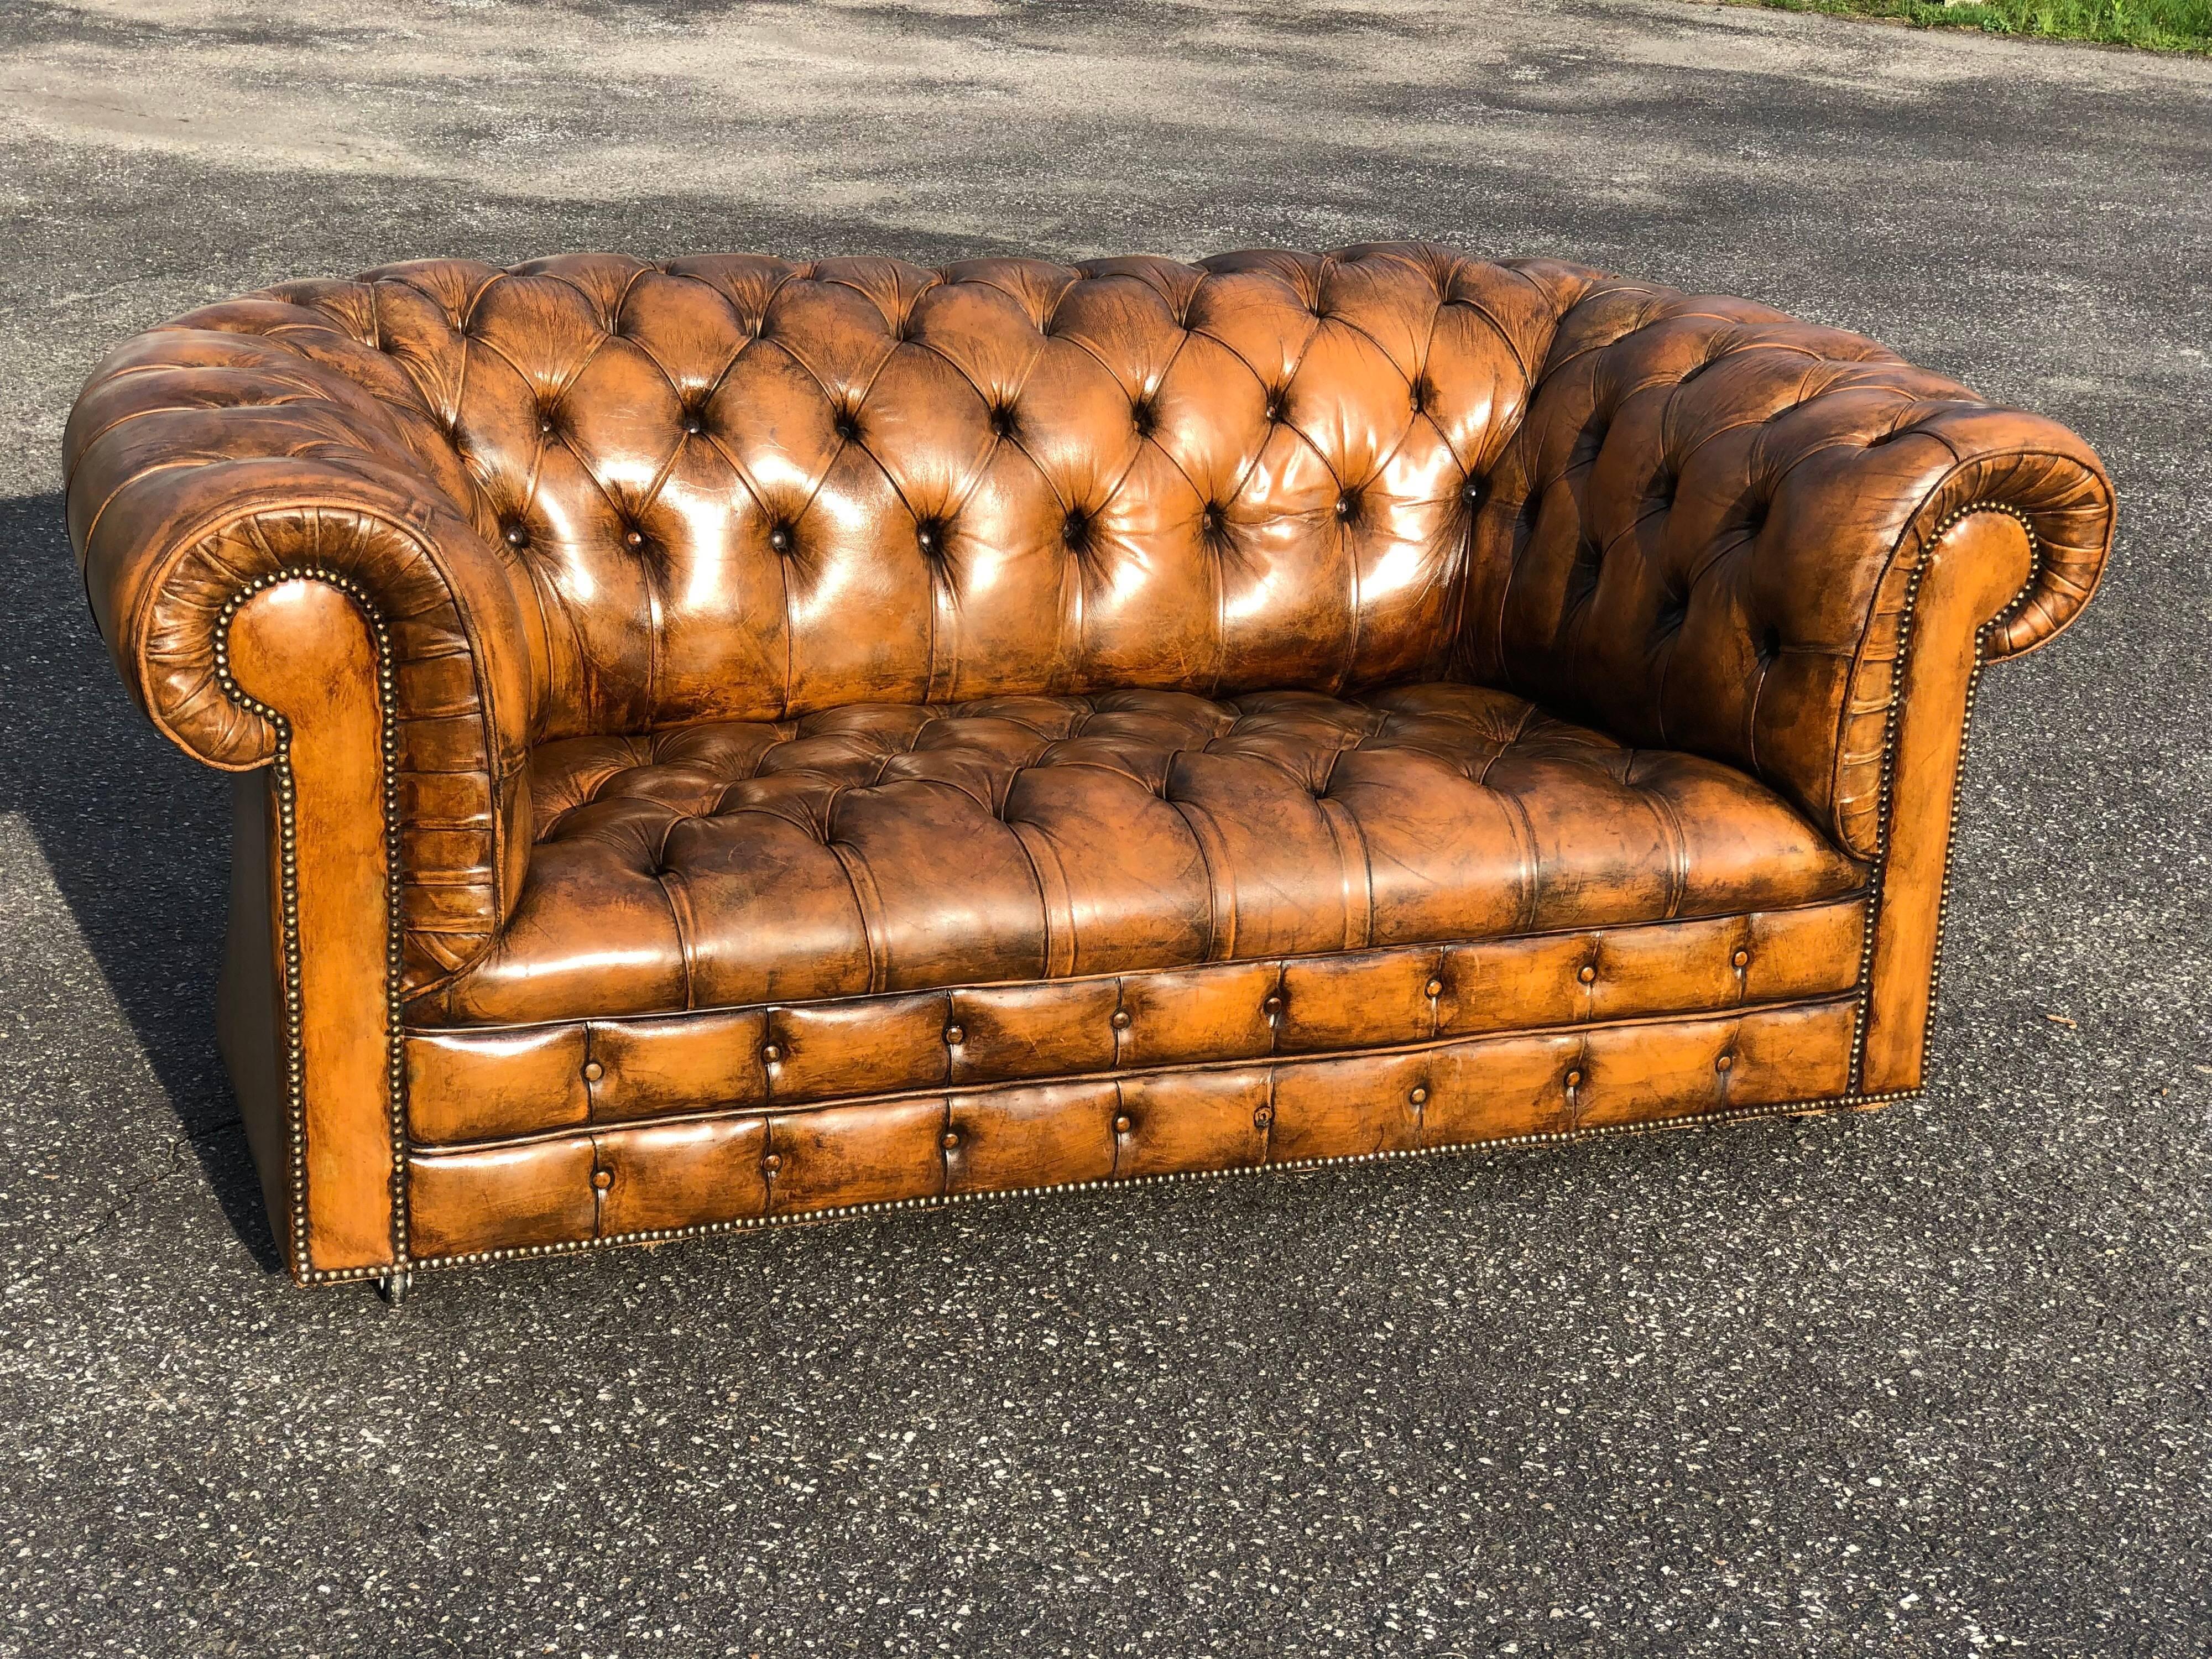 Antique Classic leather Chesterfield love seat. This is the real deal here. Amazing aged patina but leather is in excellent condition. This timeless and Classic sofa and will complement any study, office, bedroom or living space.  It has strong